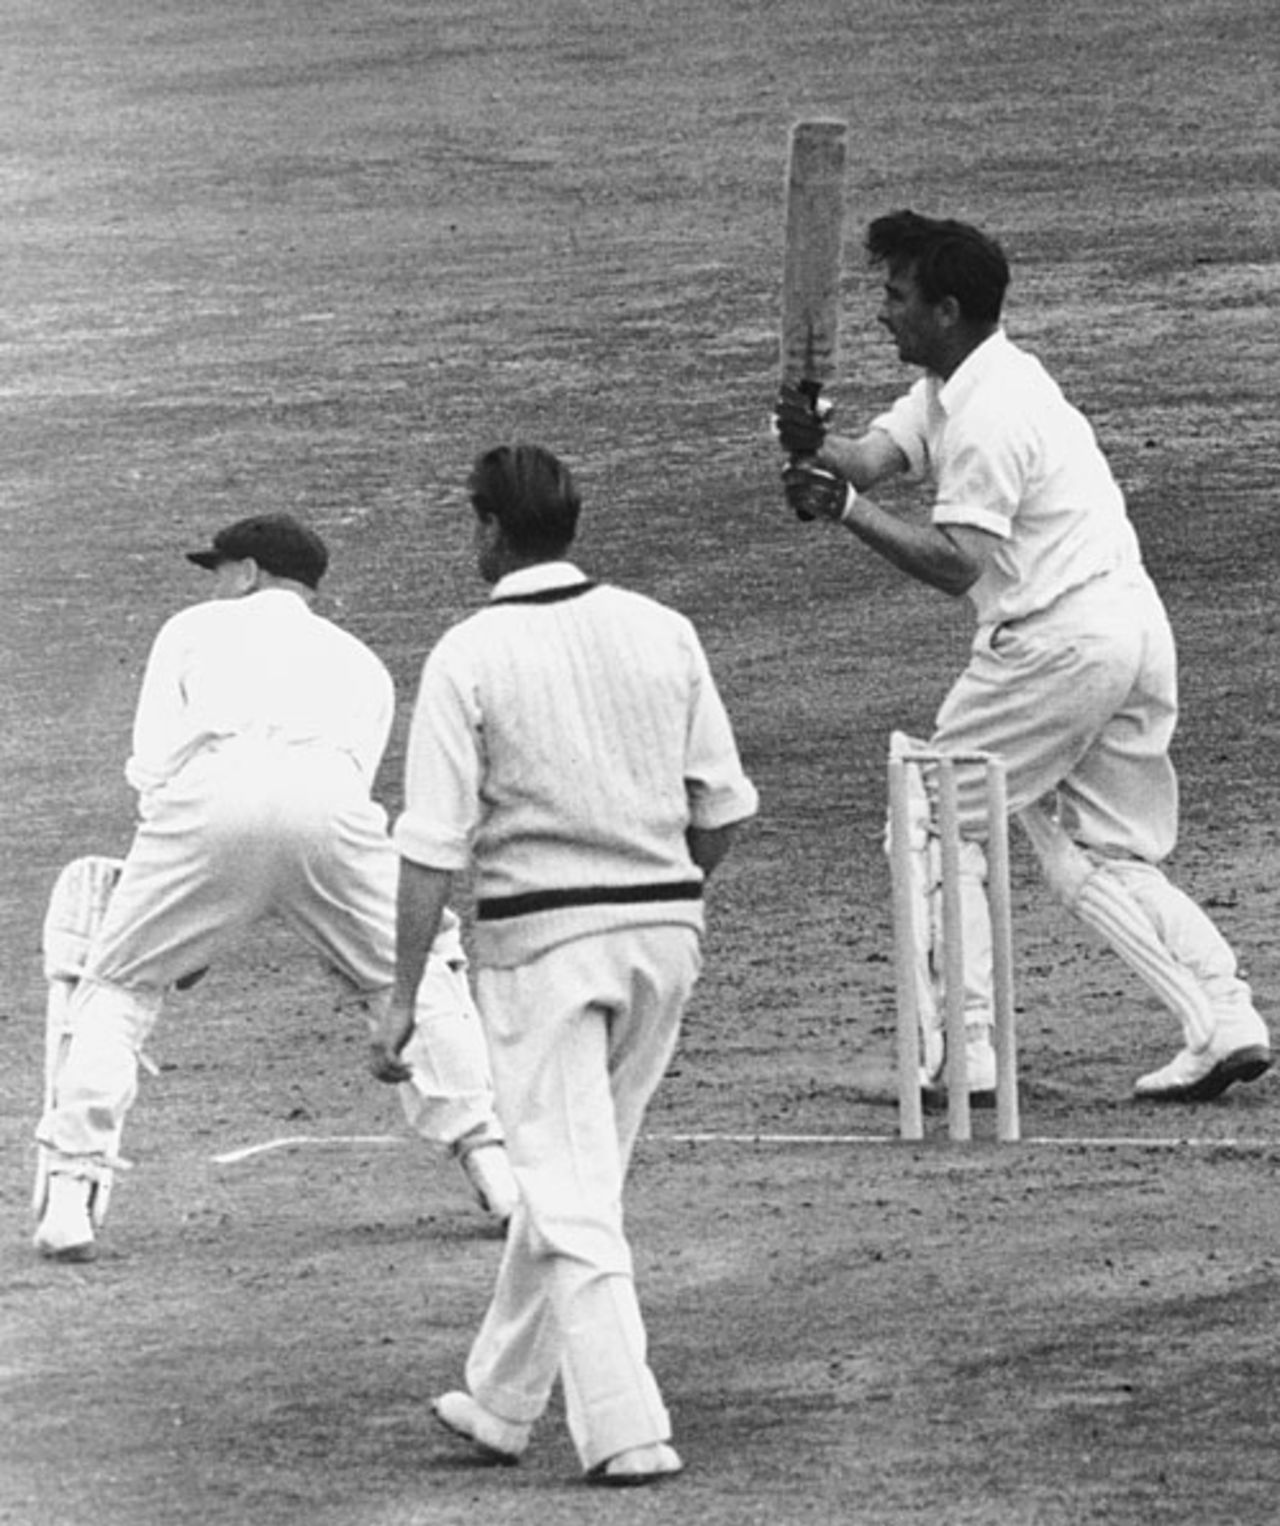 Denis Compton hits the winning runs to give England the Ashes, England v Australia, 5th Test, 4th day, The Oval, August 19, 1953